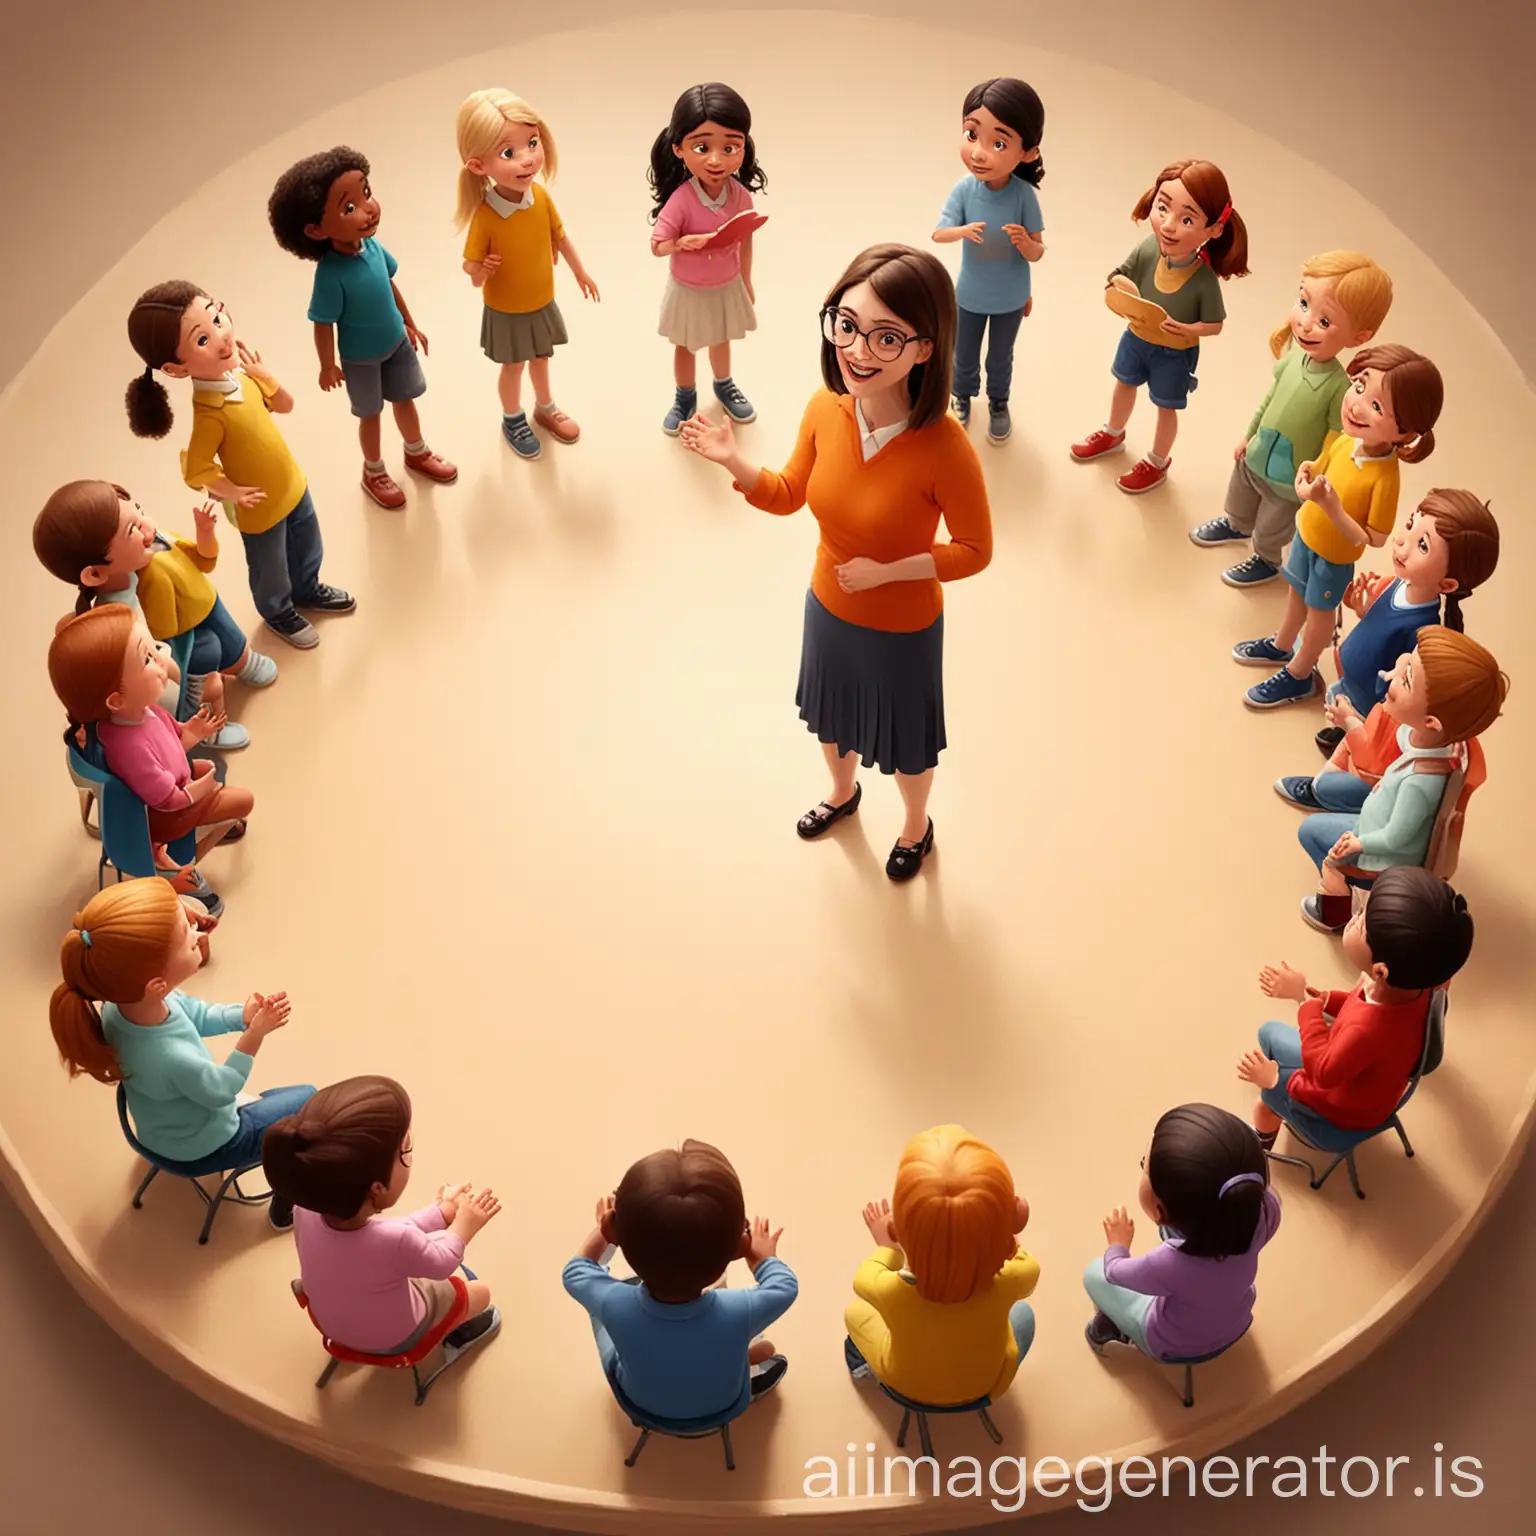 create a cute image of a teacher in the class narrating story to kids that are standing in a circle shape in the classroom